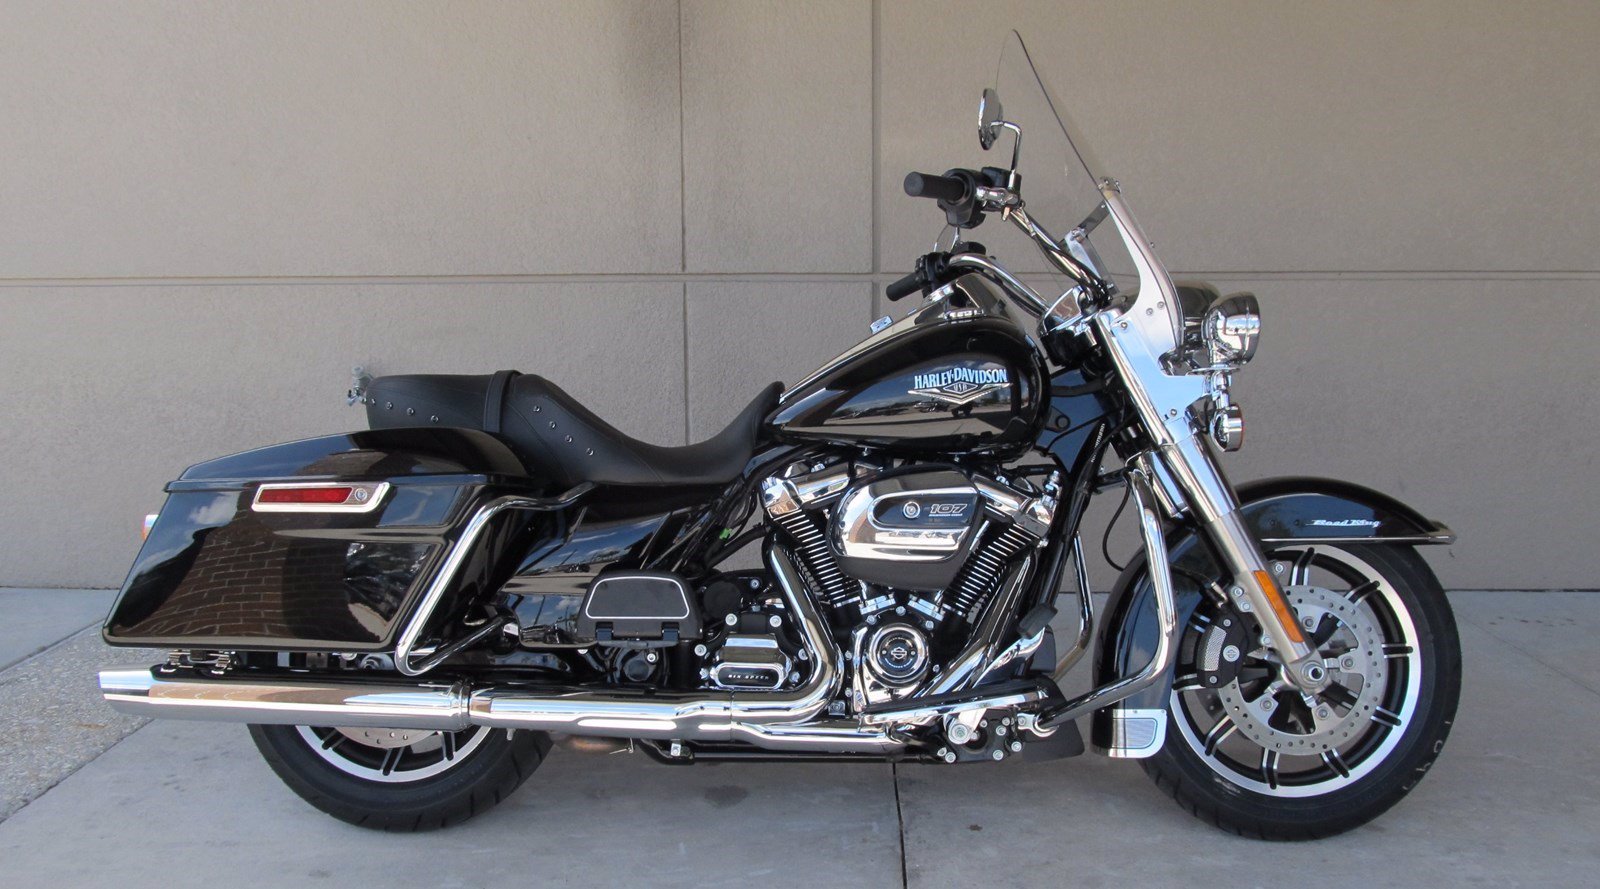 New 2019 Harley Davidson Road King FLHR Touring in 